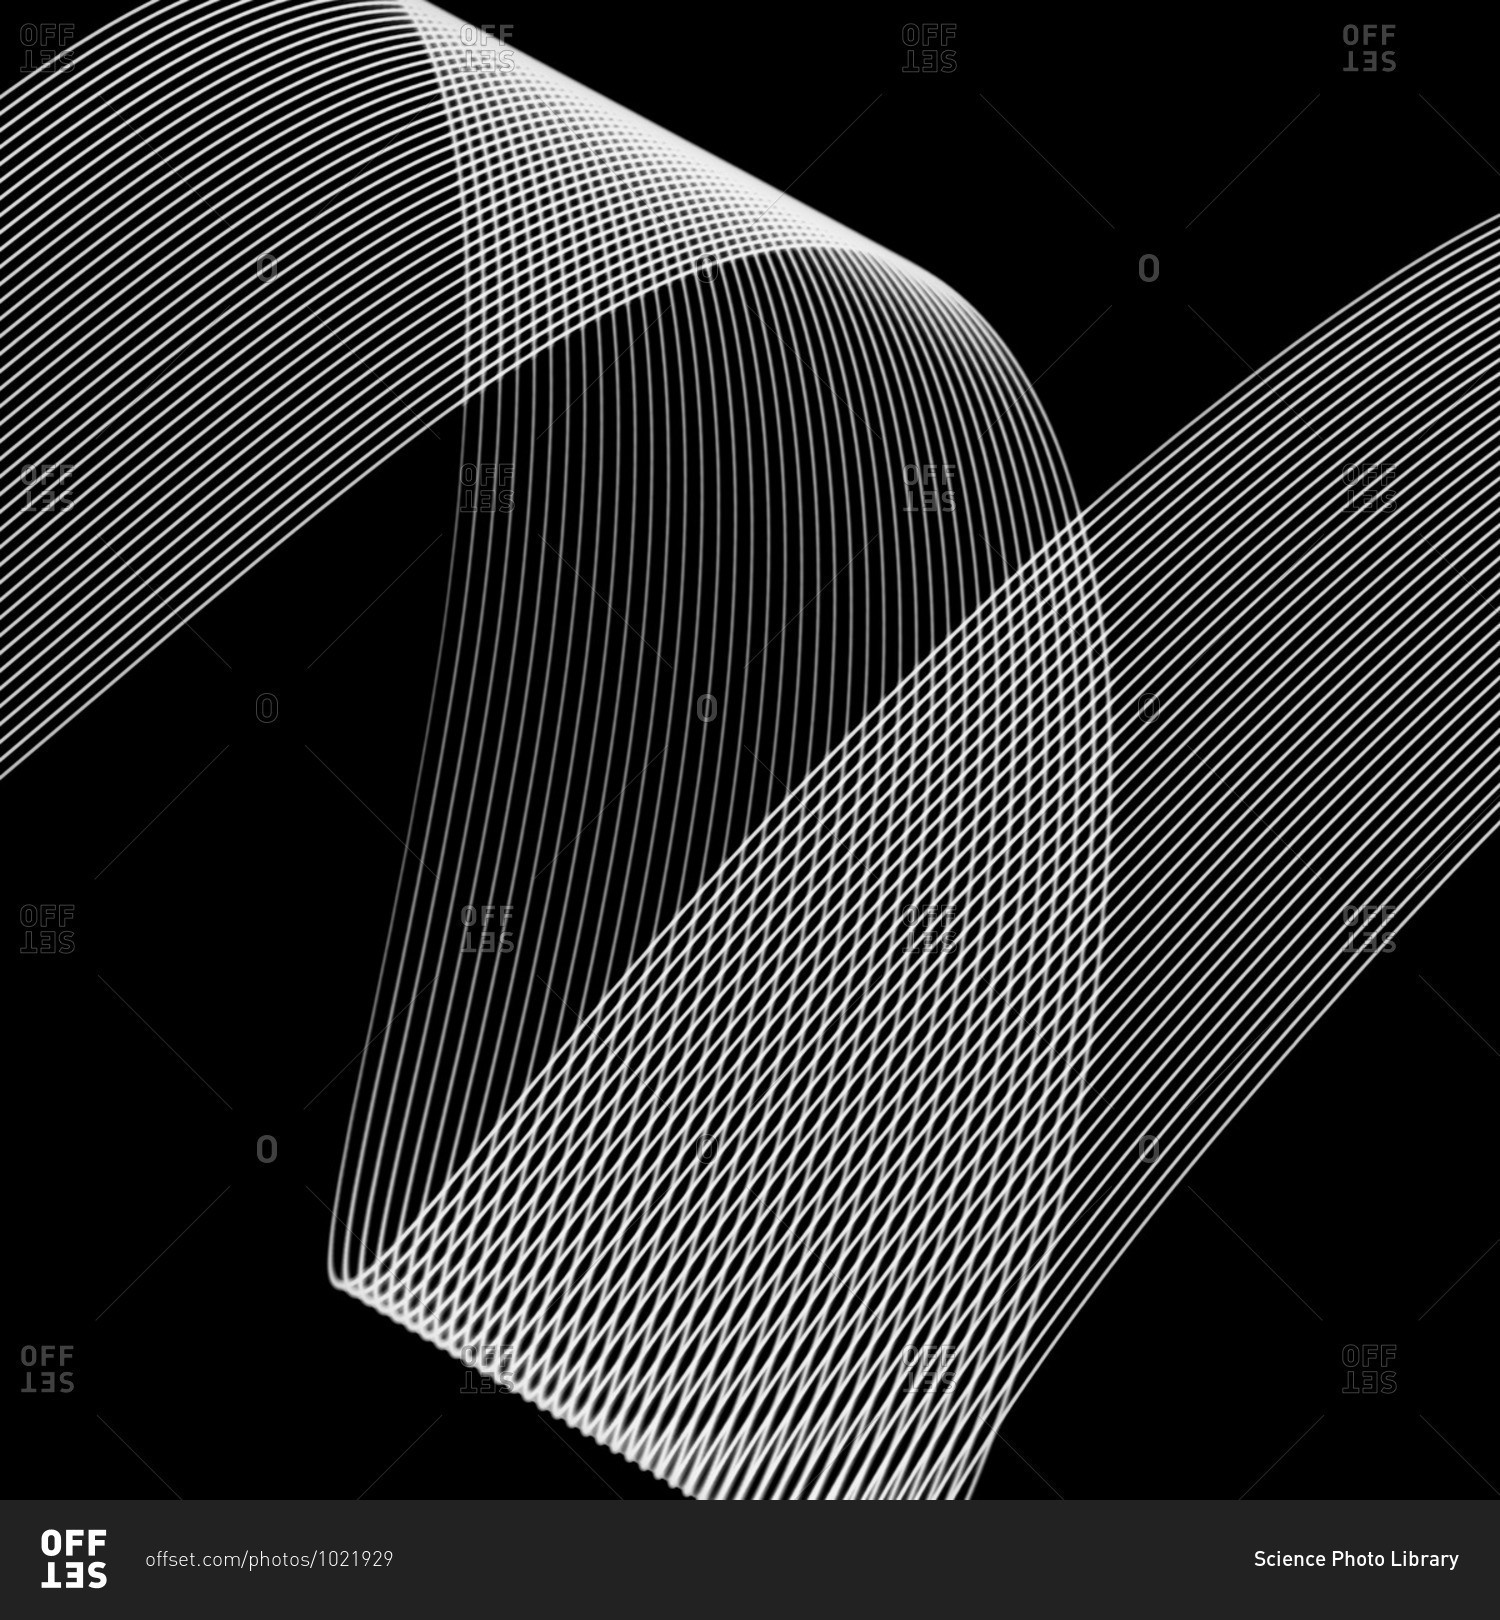 Ribbon cable on black background, X-ray.